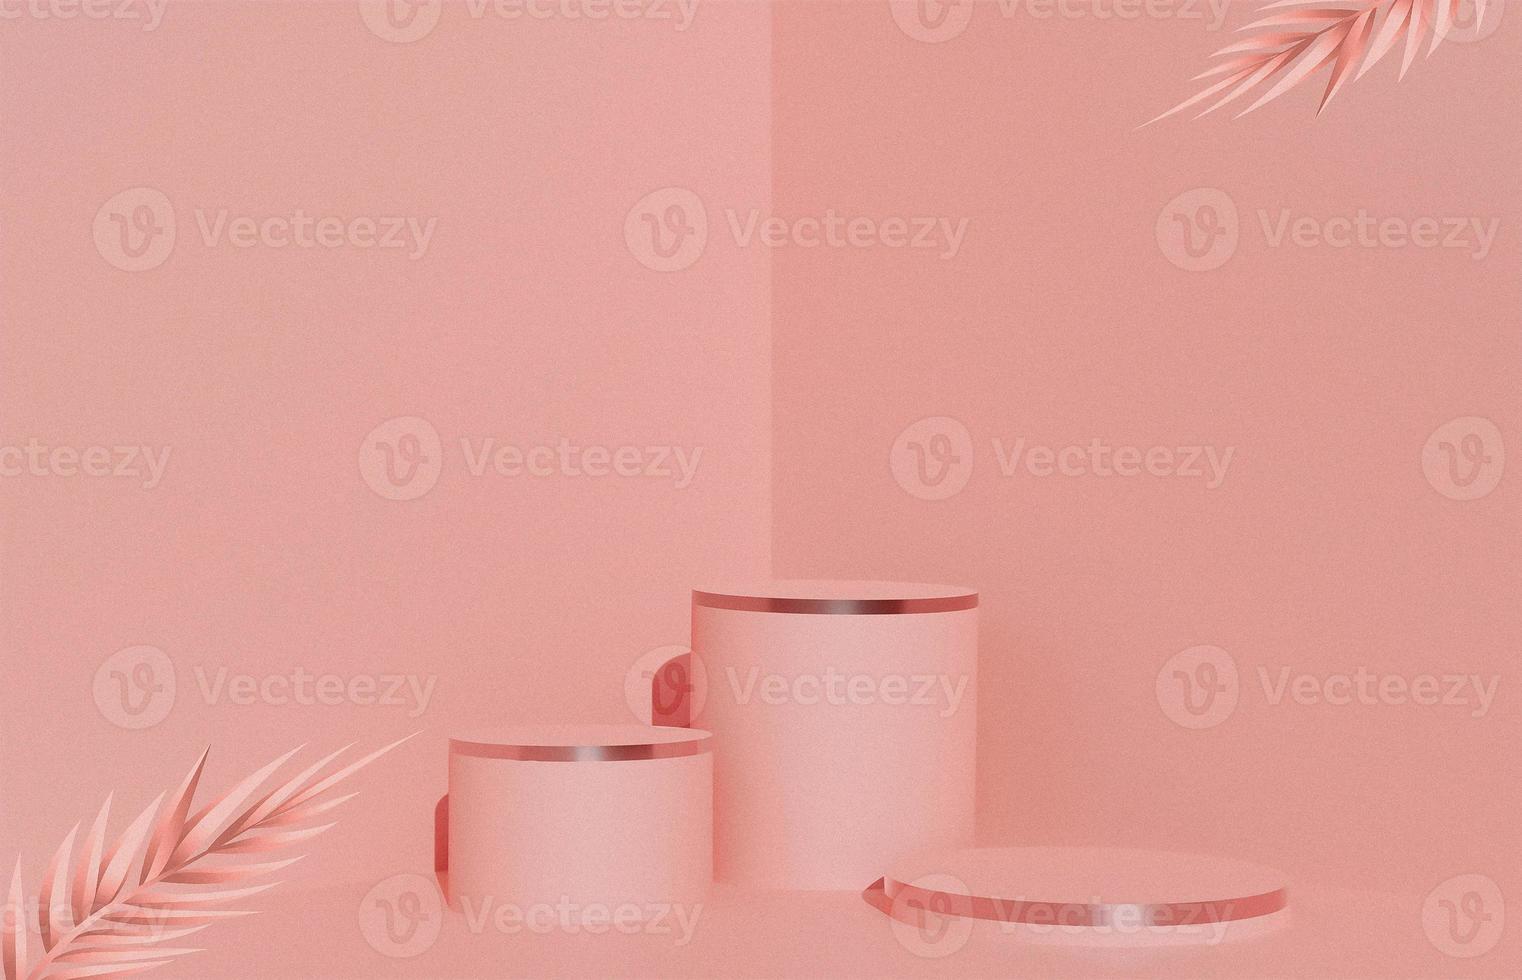 Red Pink 3 stage cylinder podium for cosmetics or beauty products display presentation with leaves 3d rendering image. photo